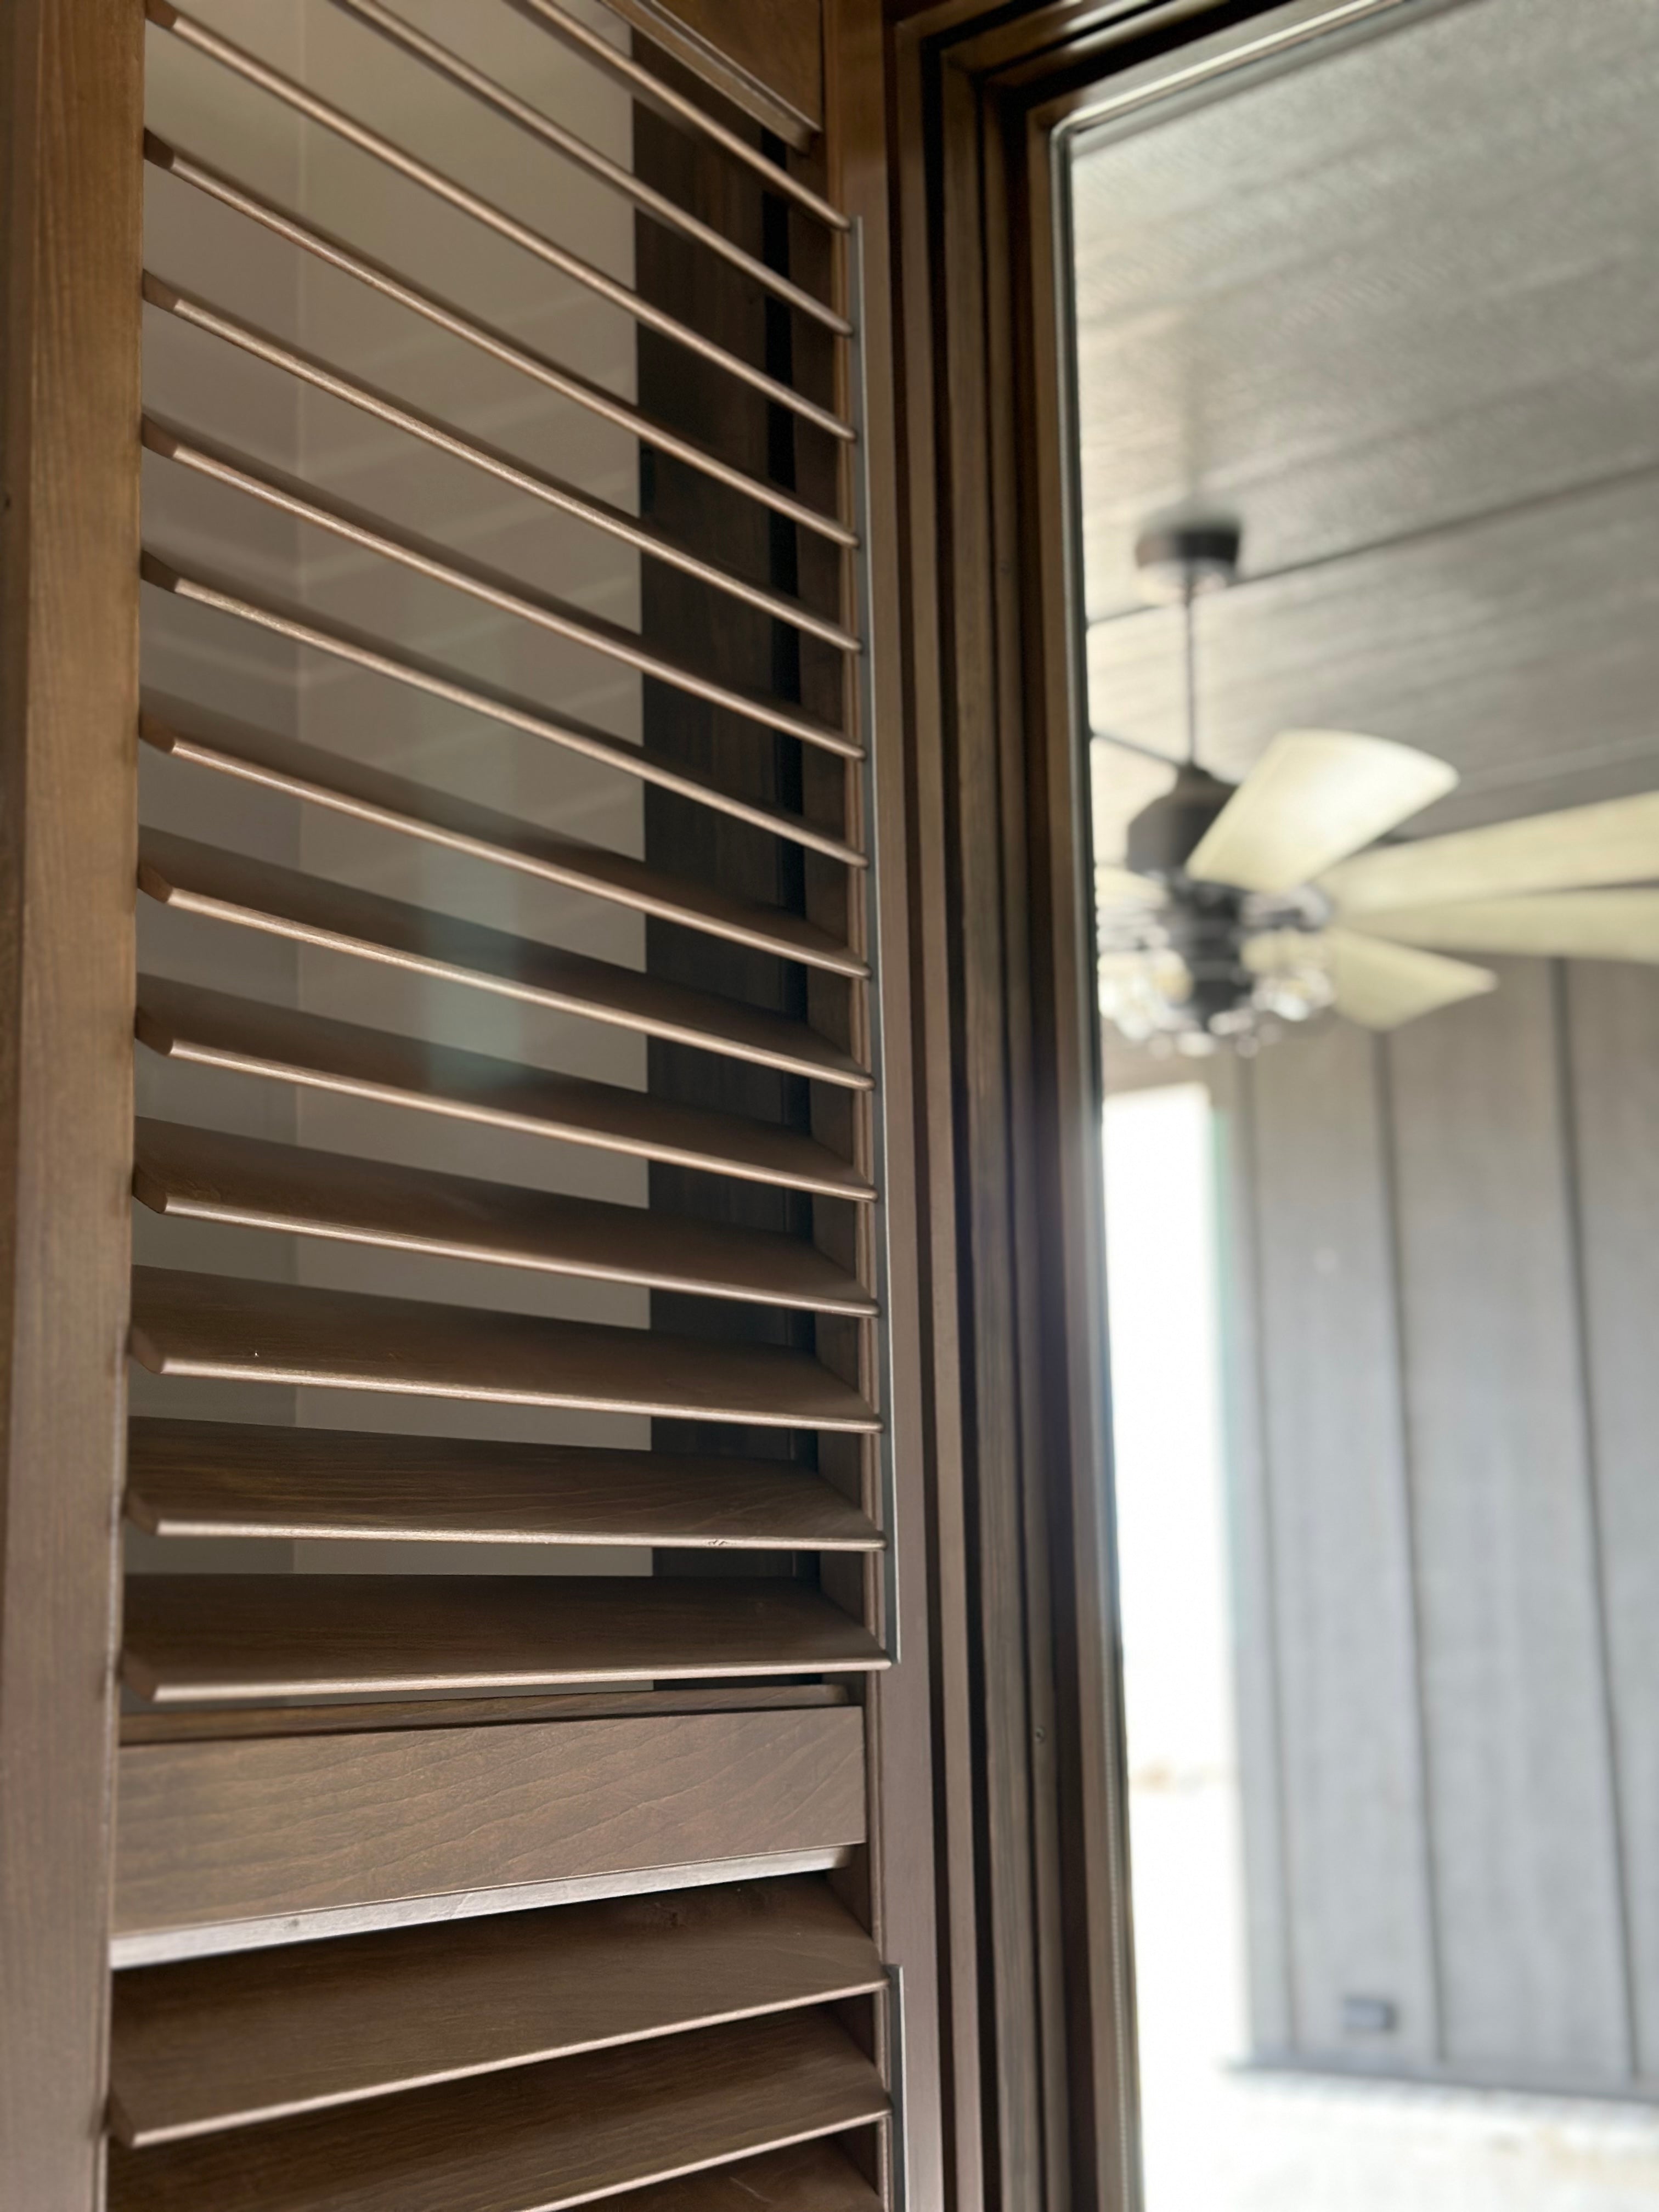 Wood Shutter Install Pictures